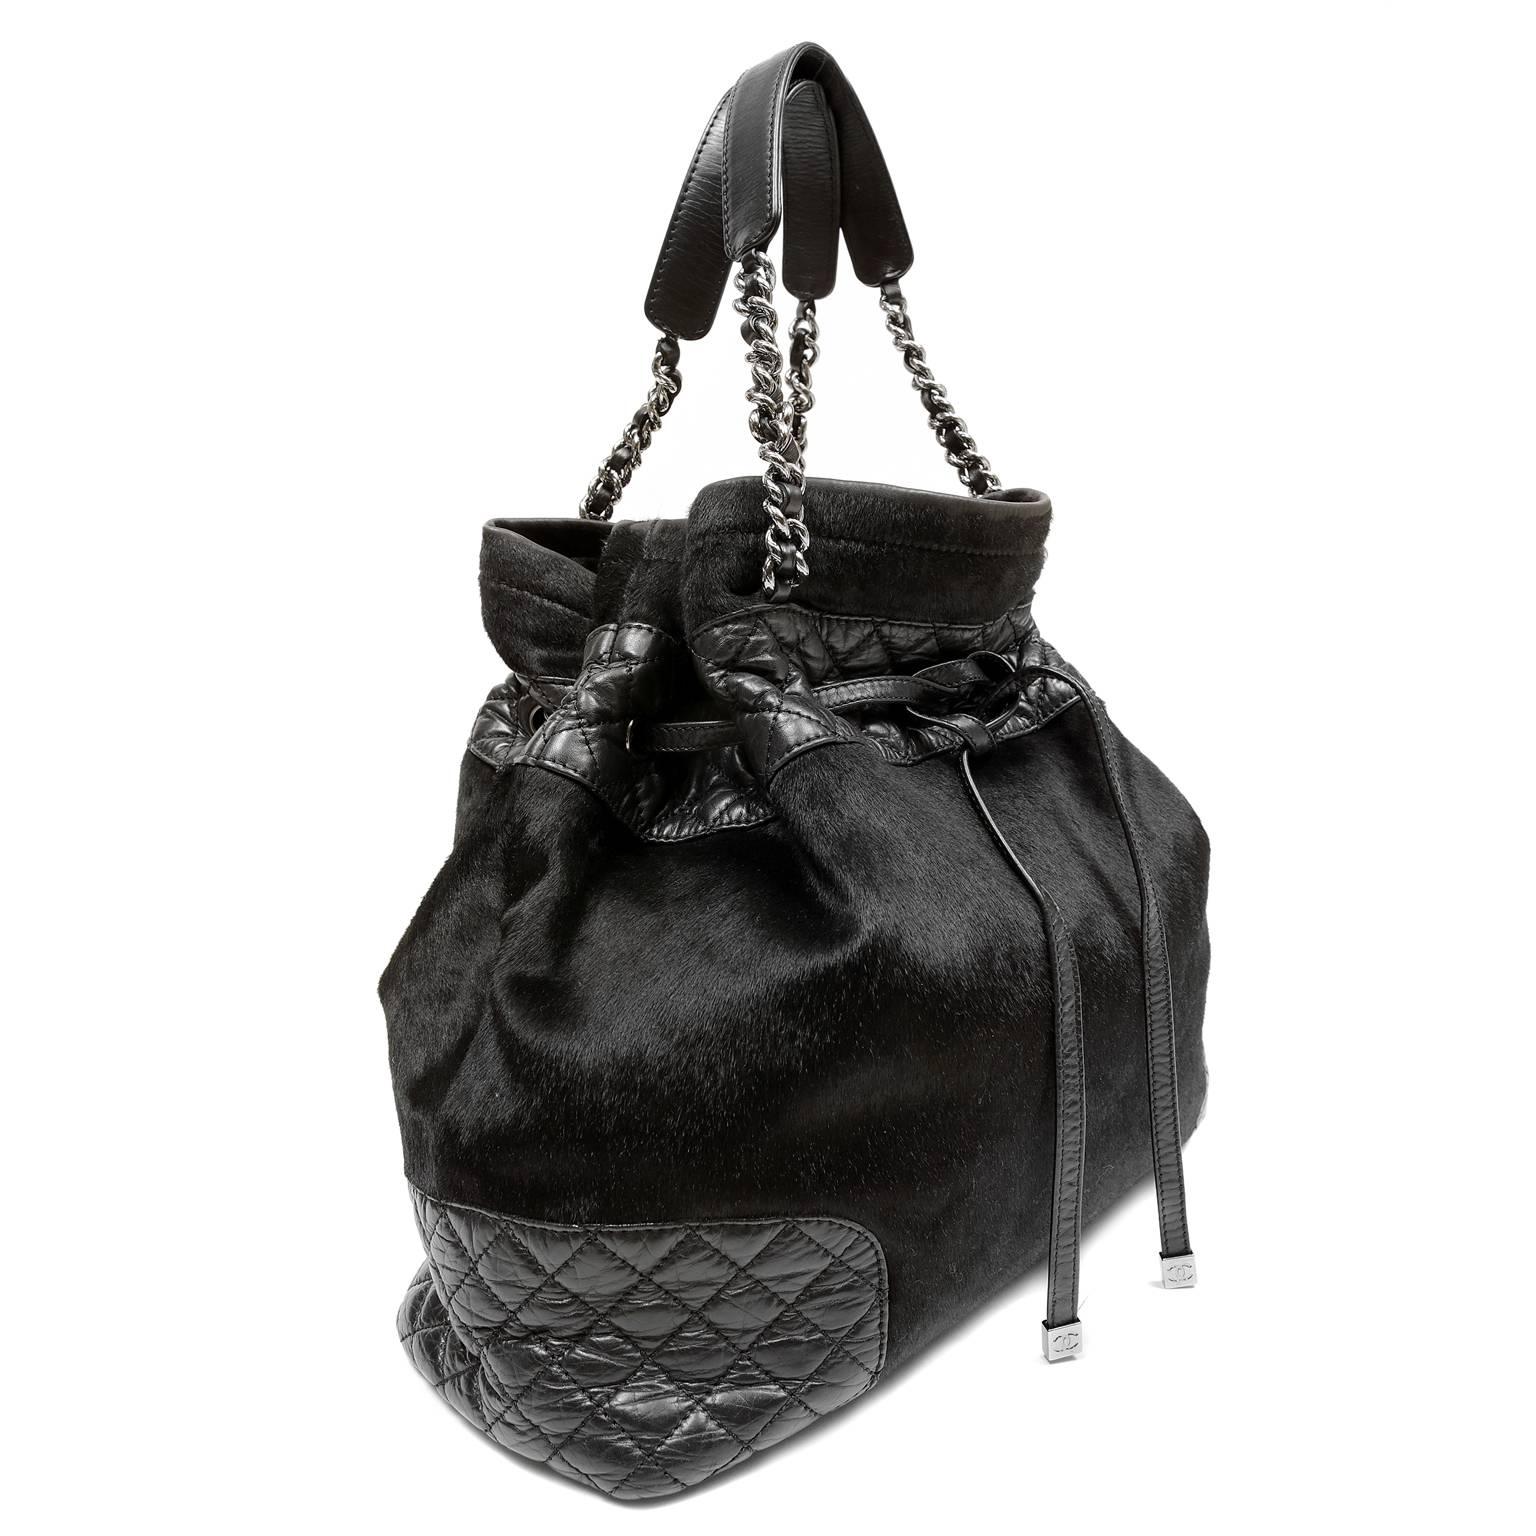 Chanel Black Calf Hair Drawstring Tote- PRISTINE Vintage Condition
  The combination of textures on this of- the- moment bucket style bag makes it a must have for collectors.  
Glossy black calf hair bucket style bag is accented with quilted